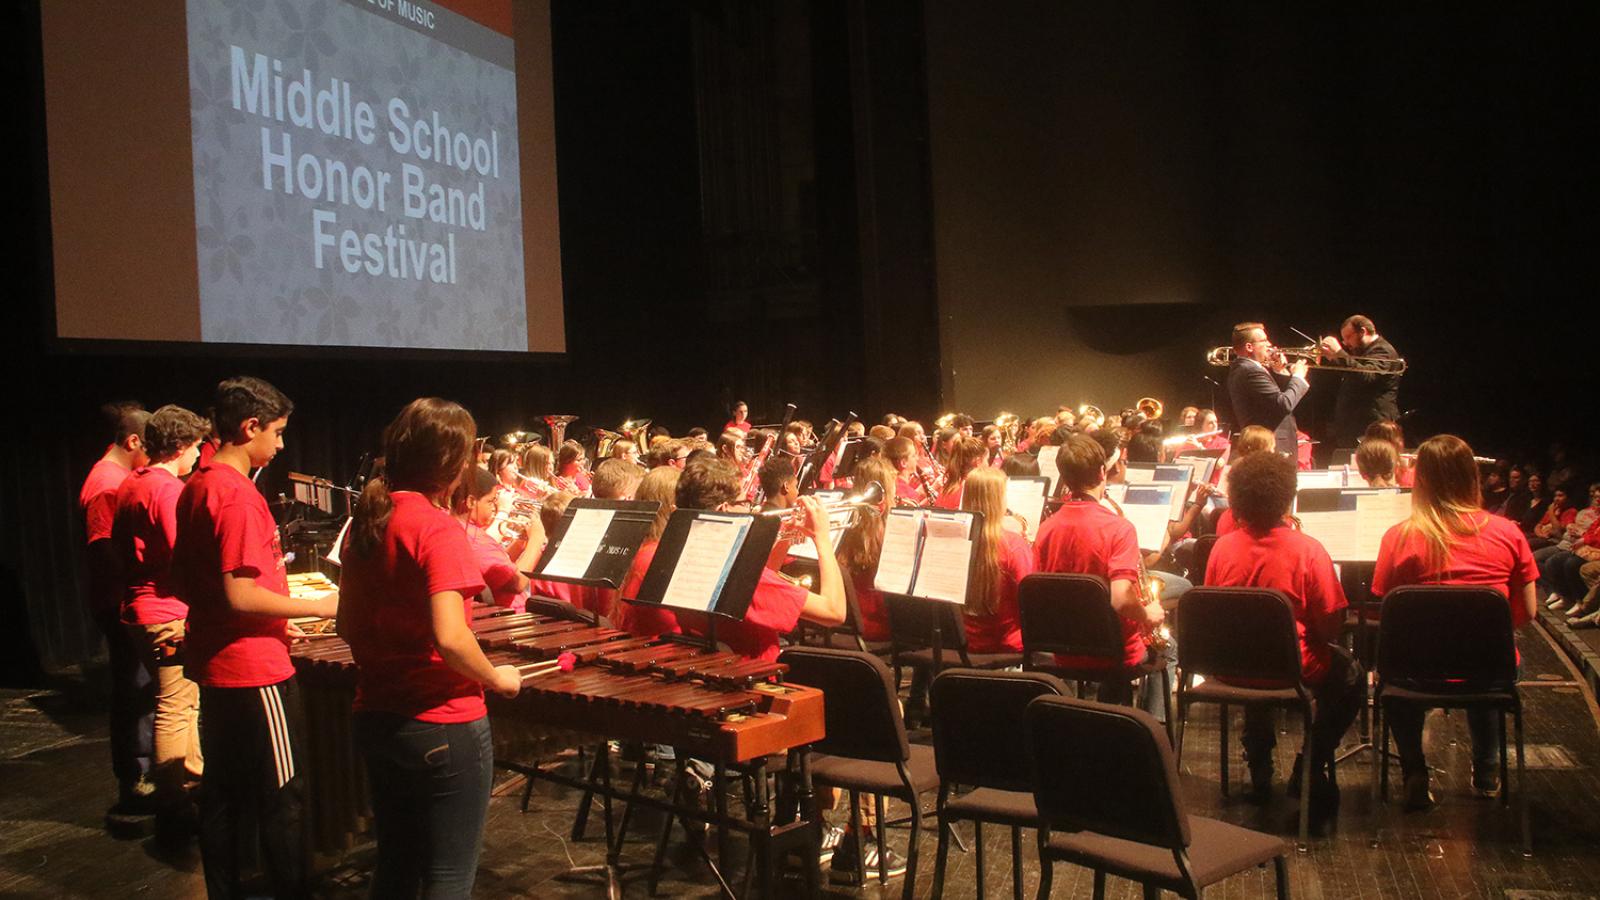 Middle School Honor Band 2019 rehearsal on Mershon stage